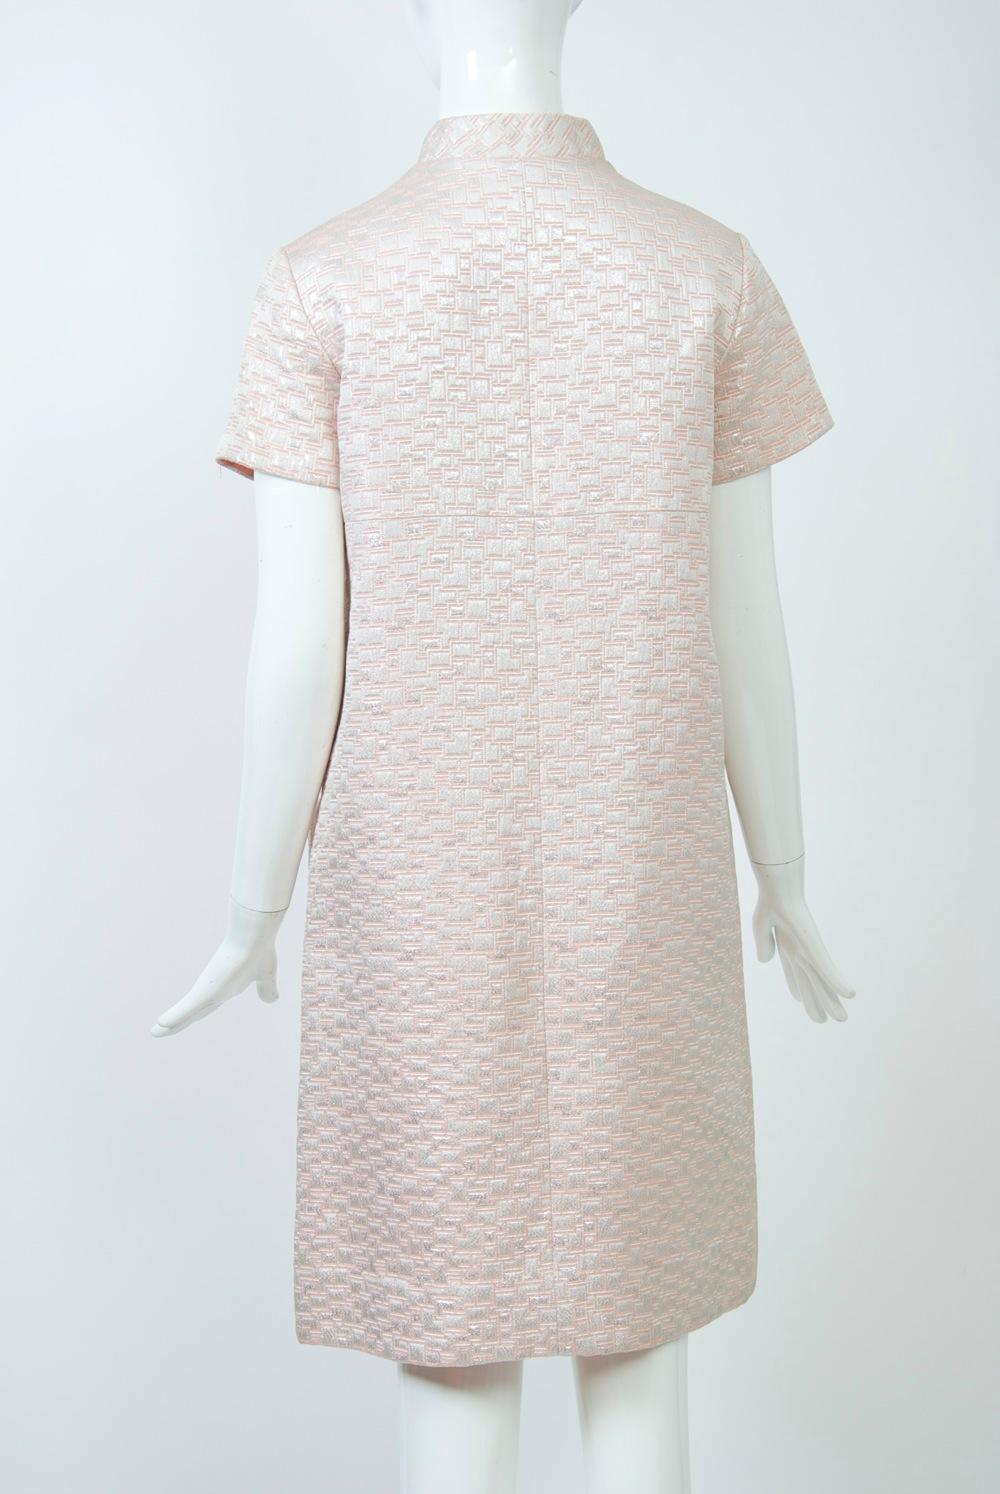 1960s Mod Brocade Dress, Don Sophisticates In Good Condition For Sale In Alford, MA